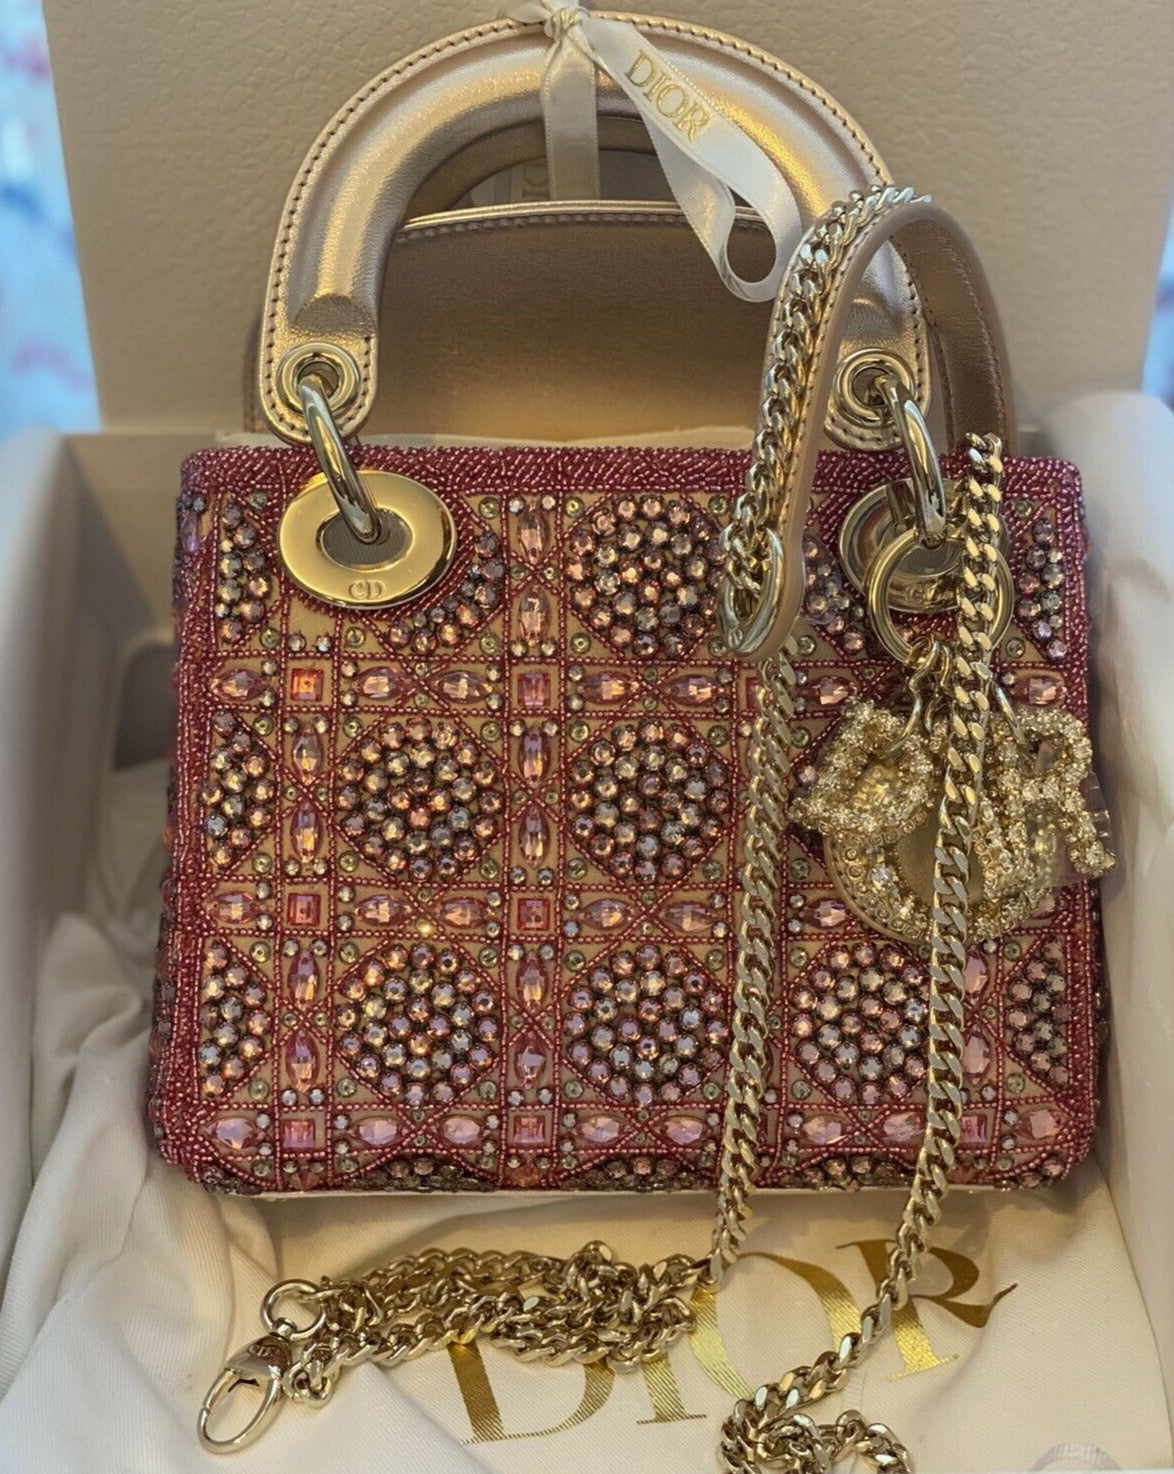 Mini Lady Dior Bag Metallic Calfskin and Satin with Rose Des Vents Resin  Pearl Embroidery